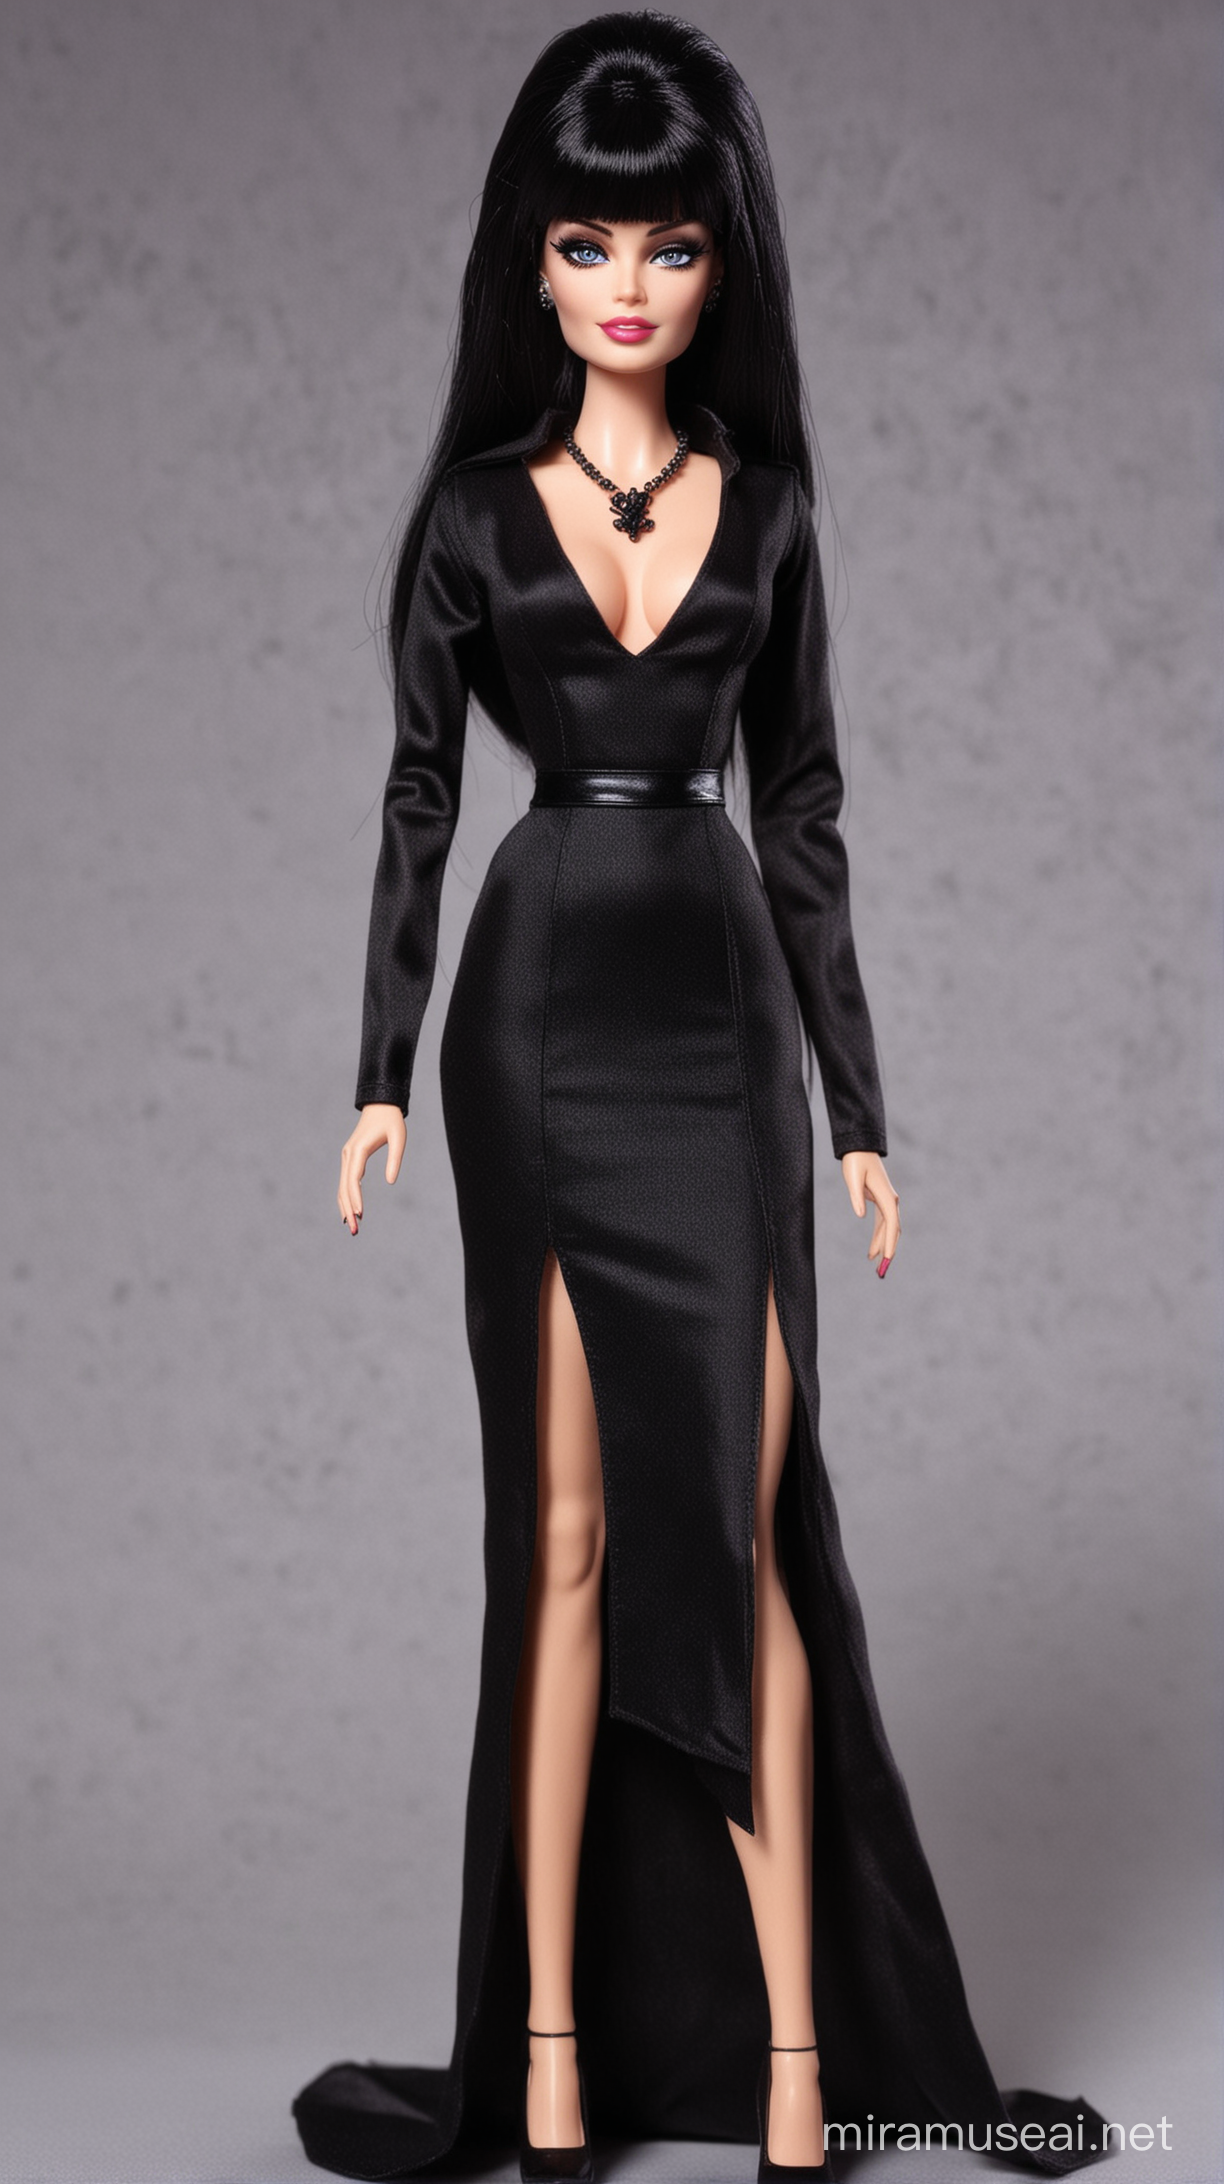 "Design a Barbie version of Elvira, Mistress of the Dark, with her long black low-cut dress and a side slit."